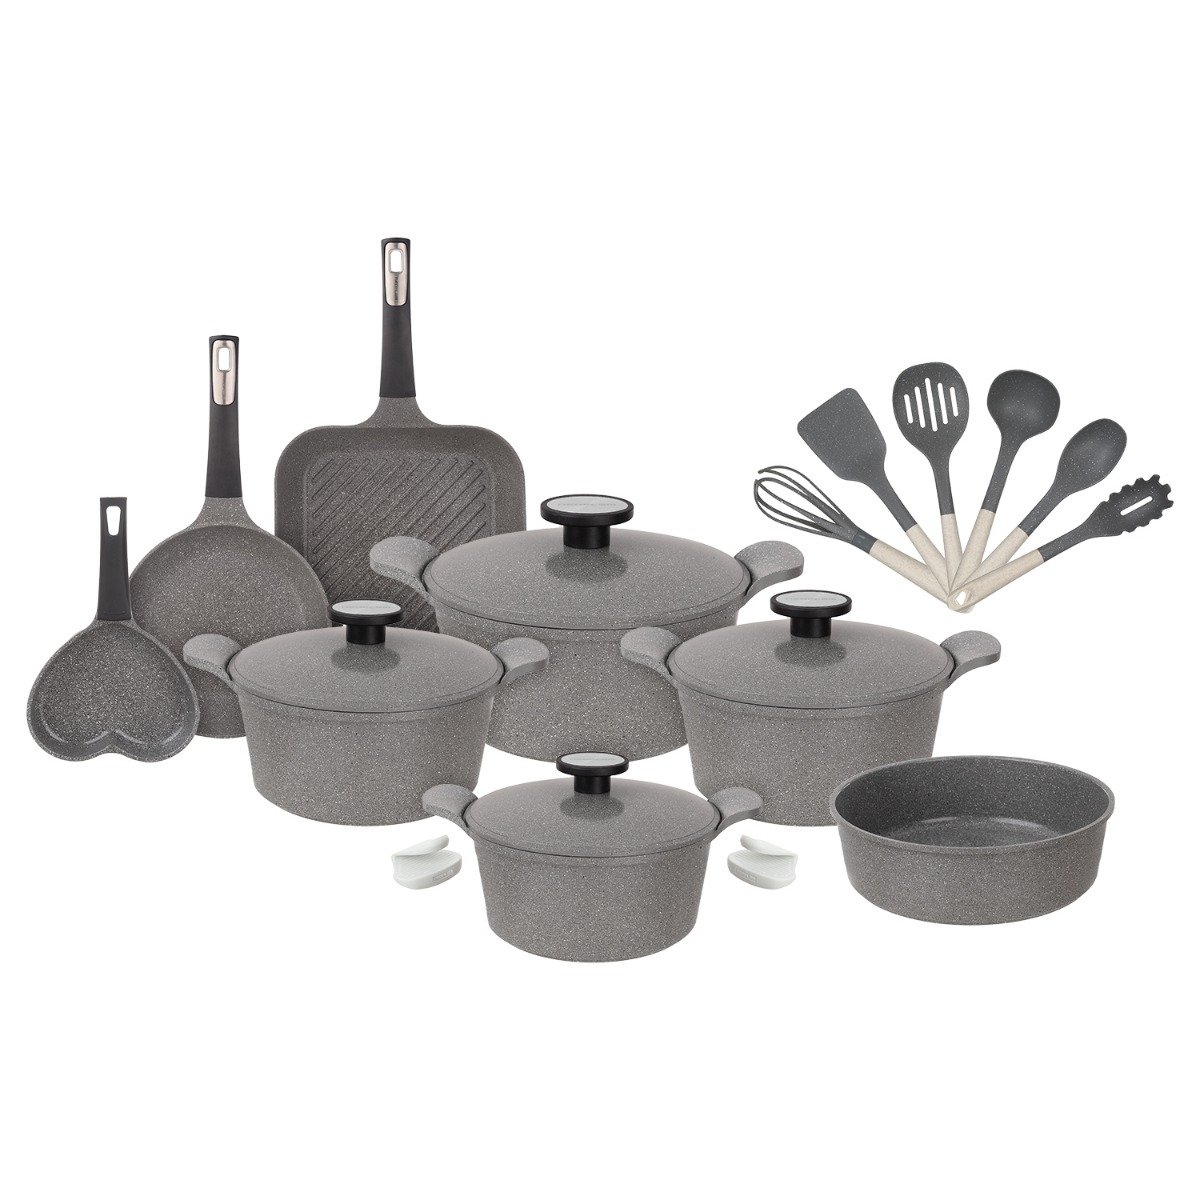 Neoflam Granite Cookware Set 19 Pieces